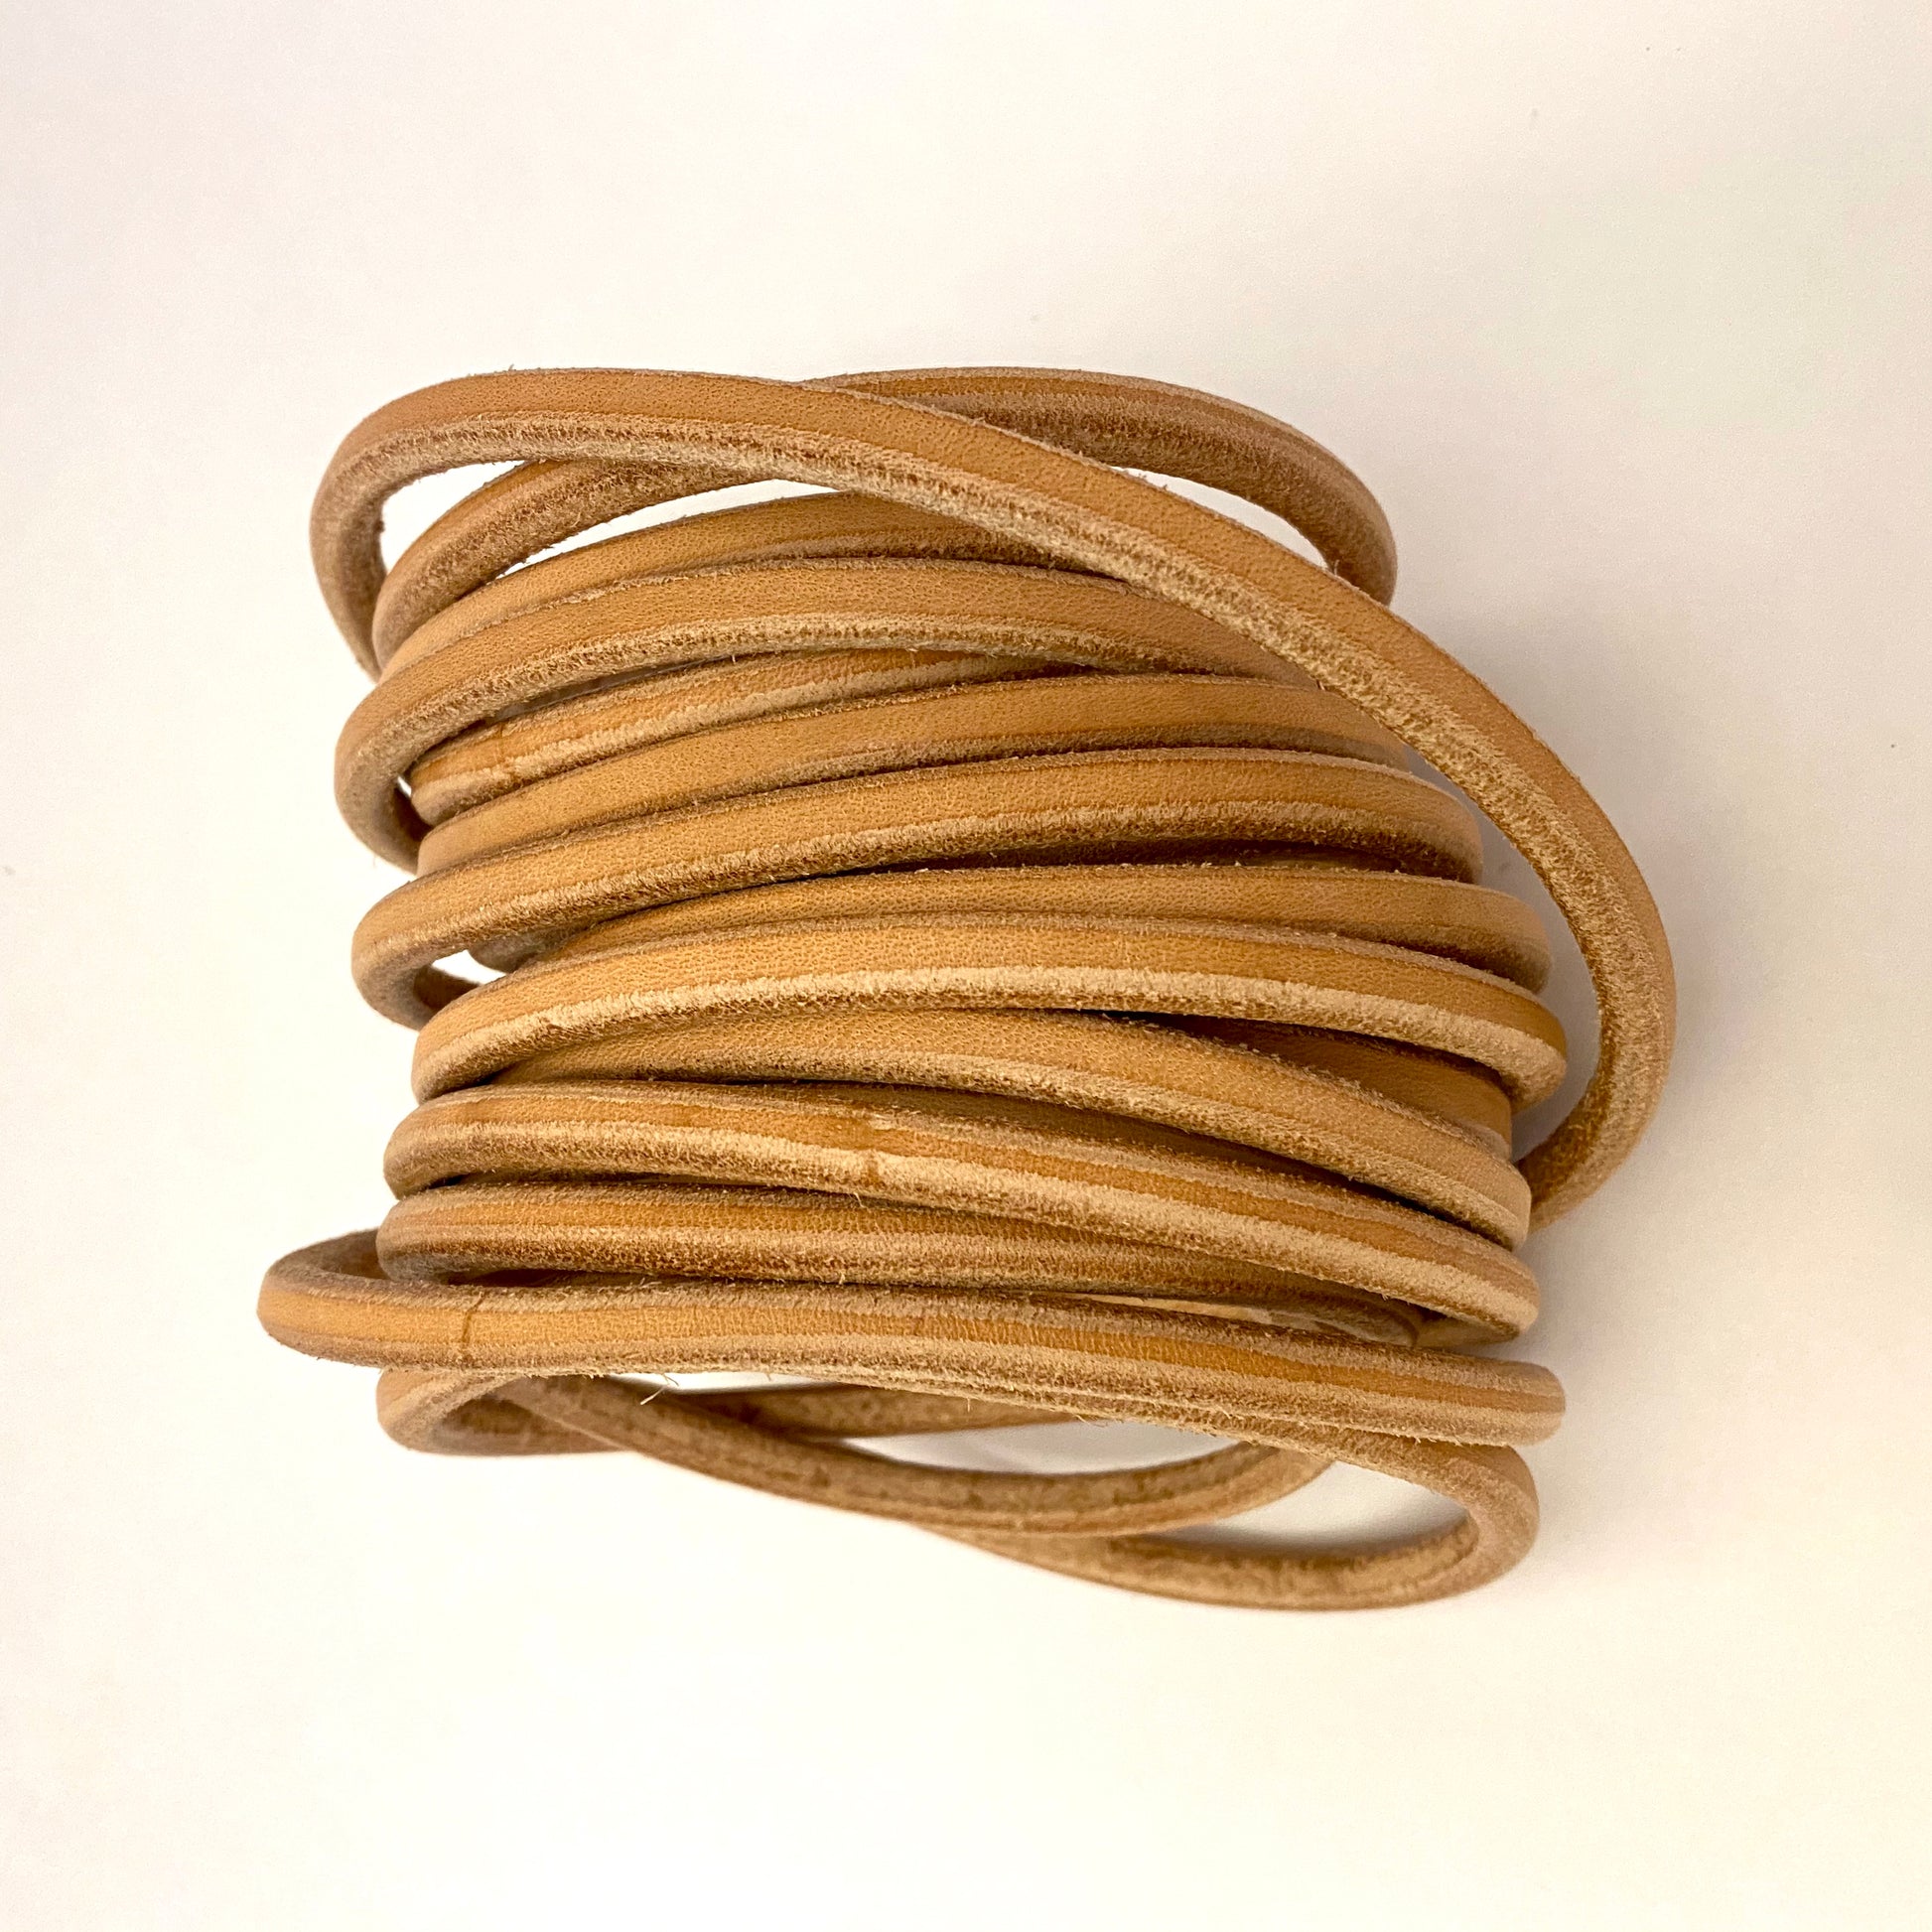 1/4 Round Leather Rope by the Foot